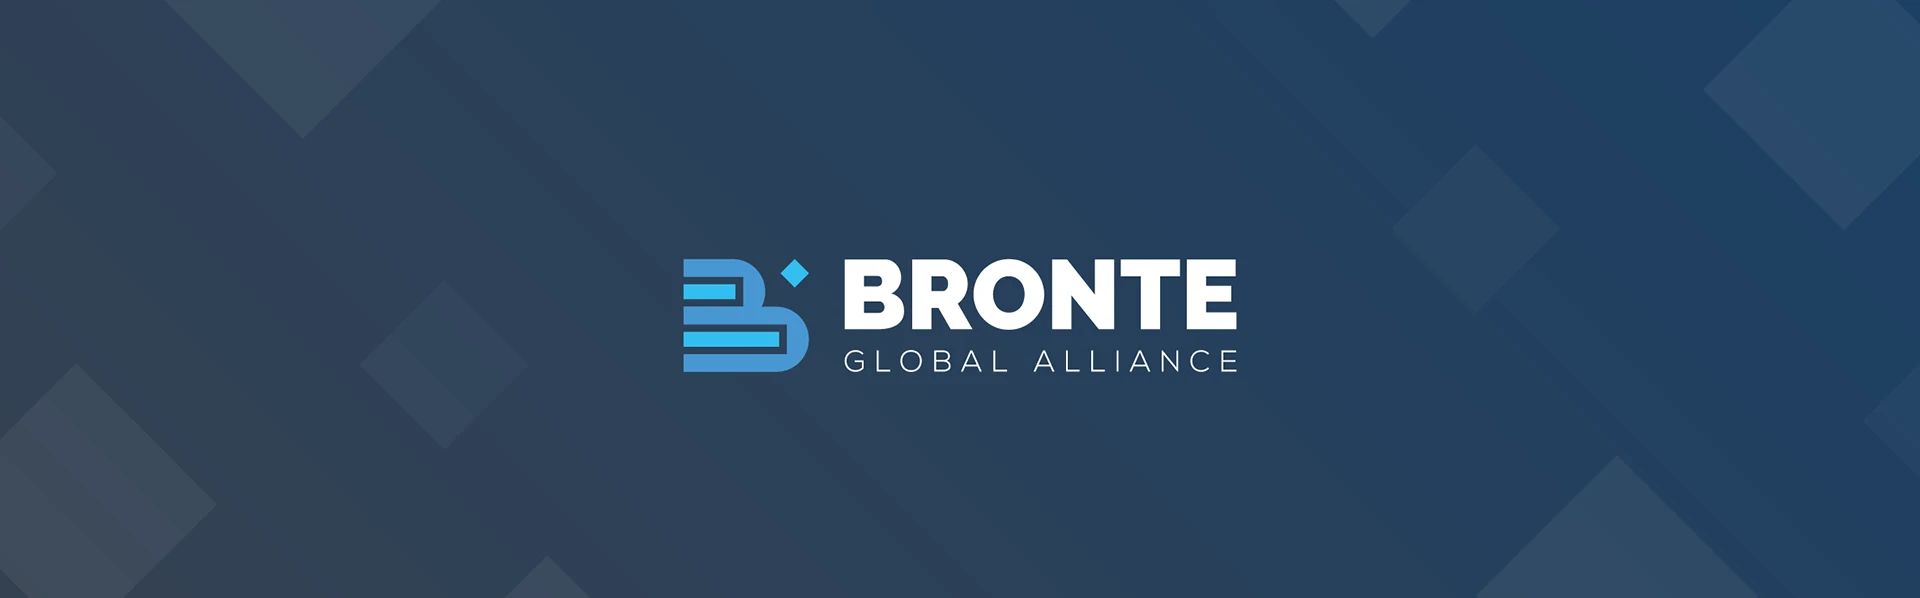 Bronte Global Alliance - Logo finale con payoff